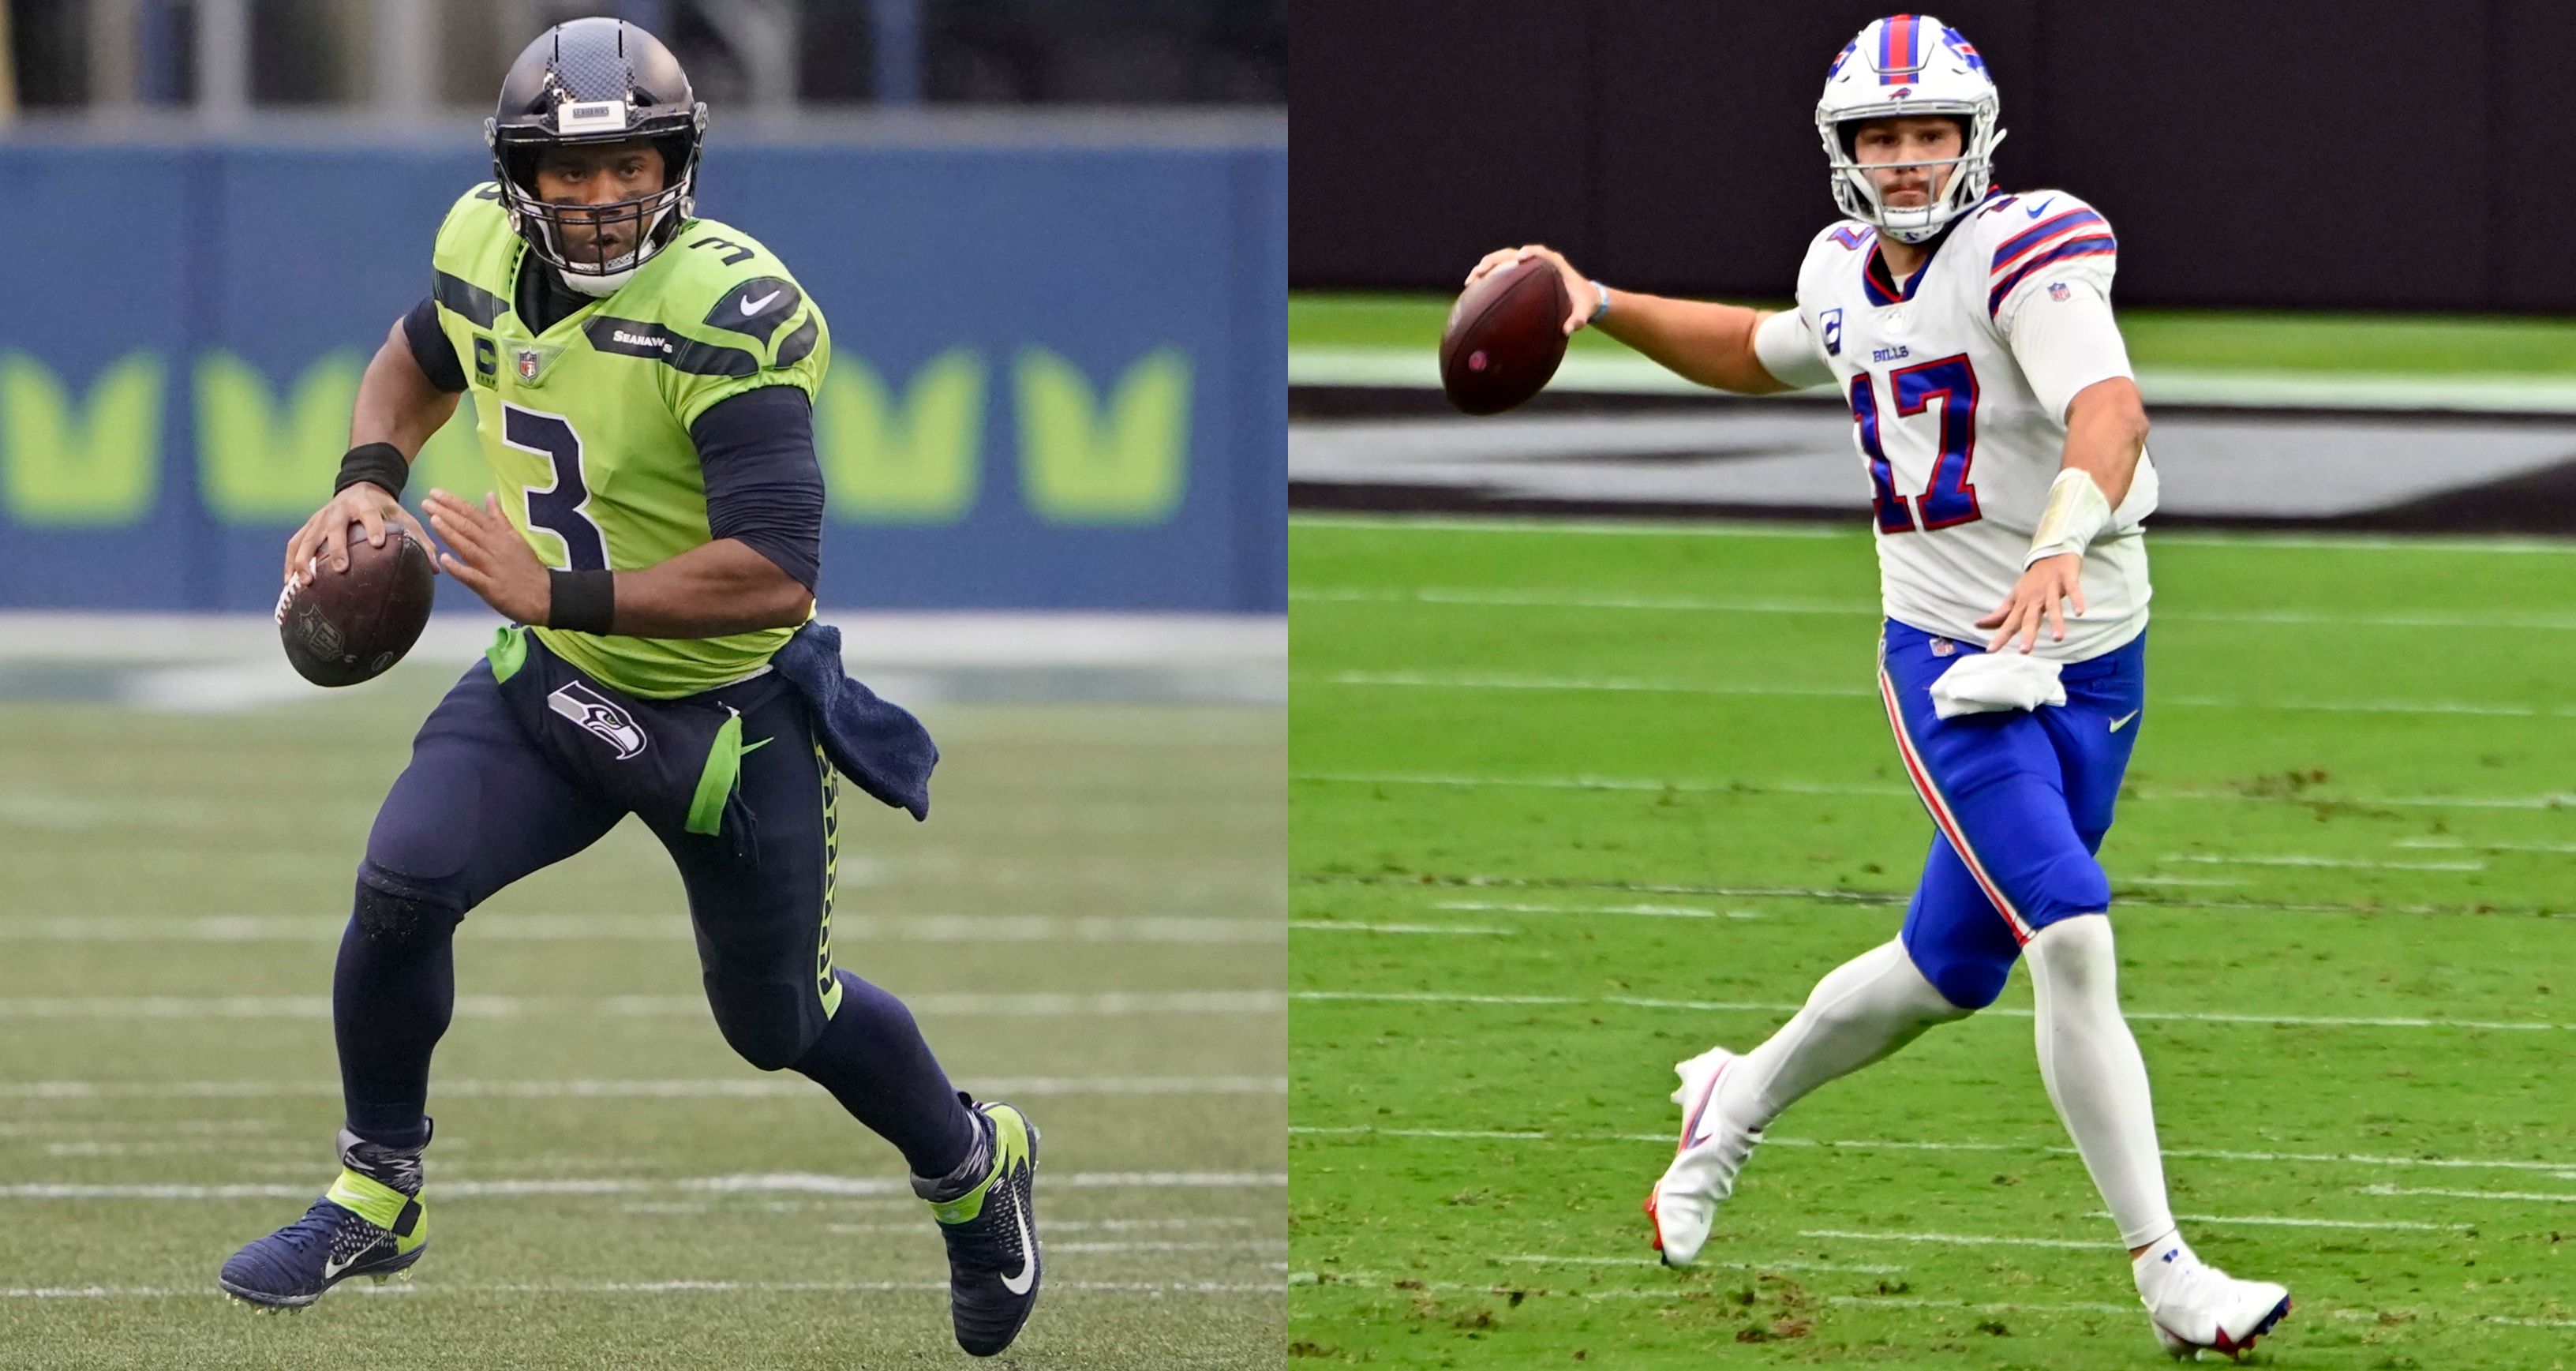 Buffalo Bills vs. Seahawks 2020: Preview, odds, predictions for Week 9 - syracuse.com